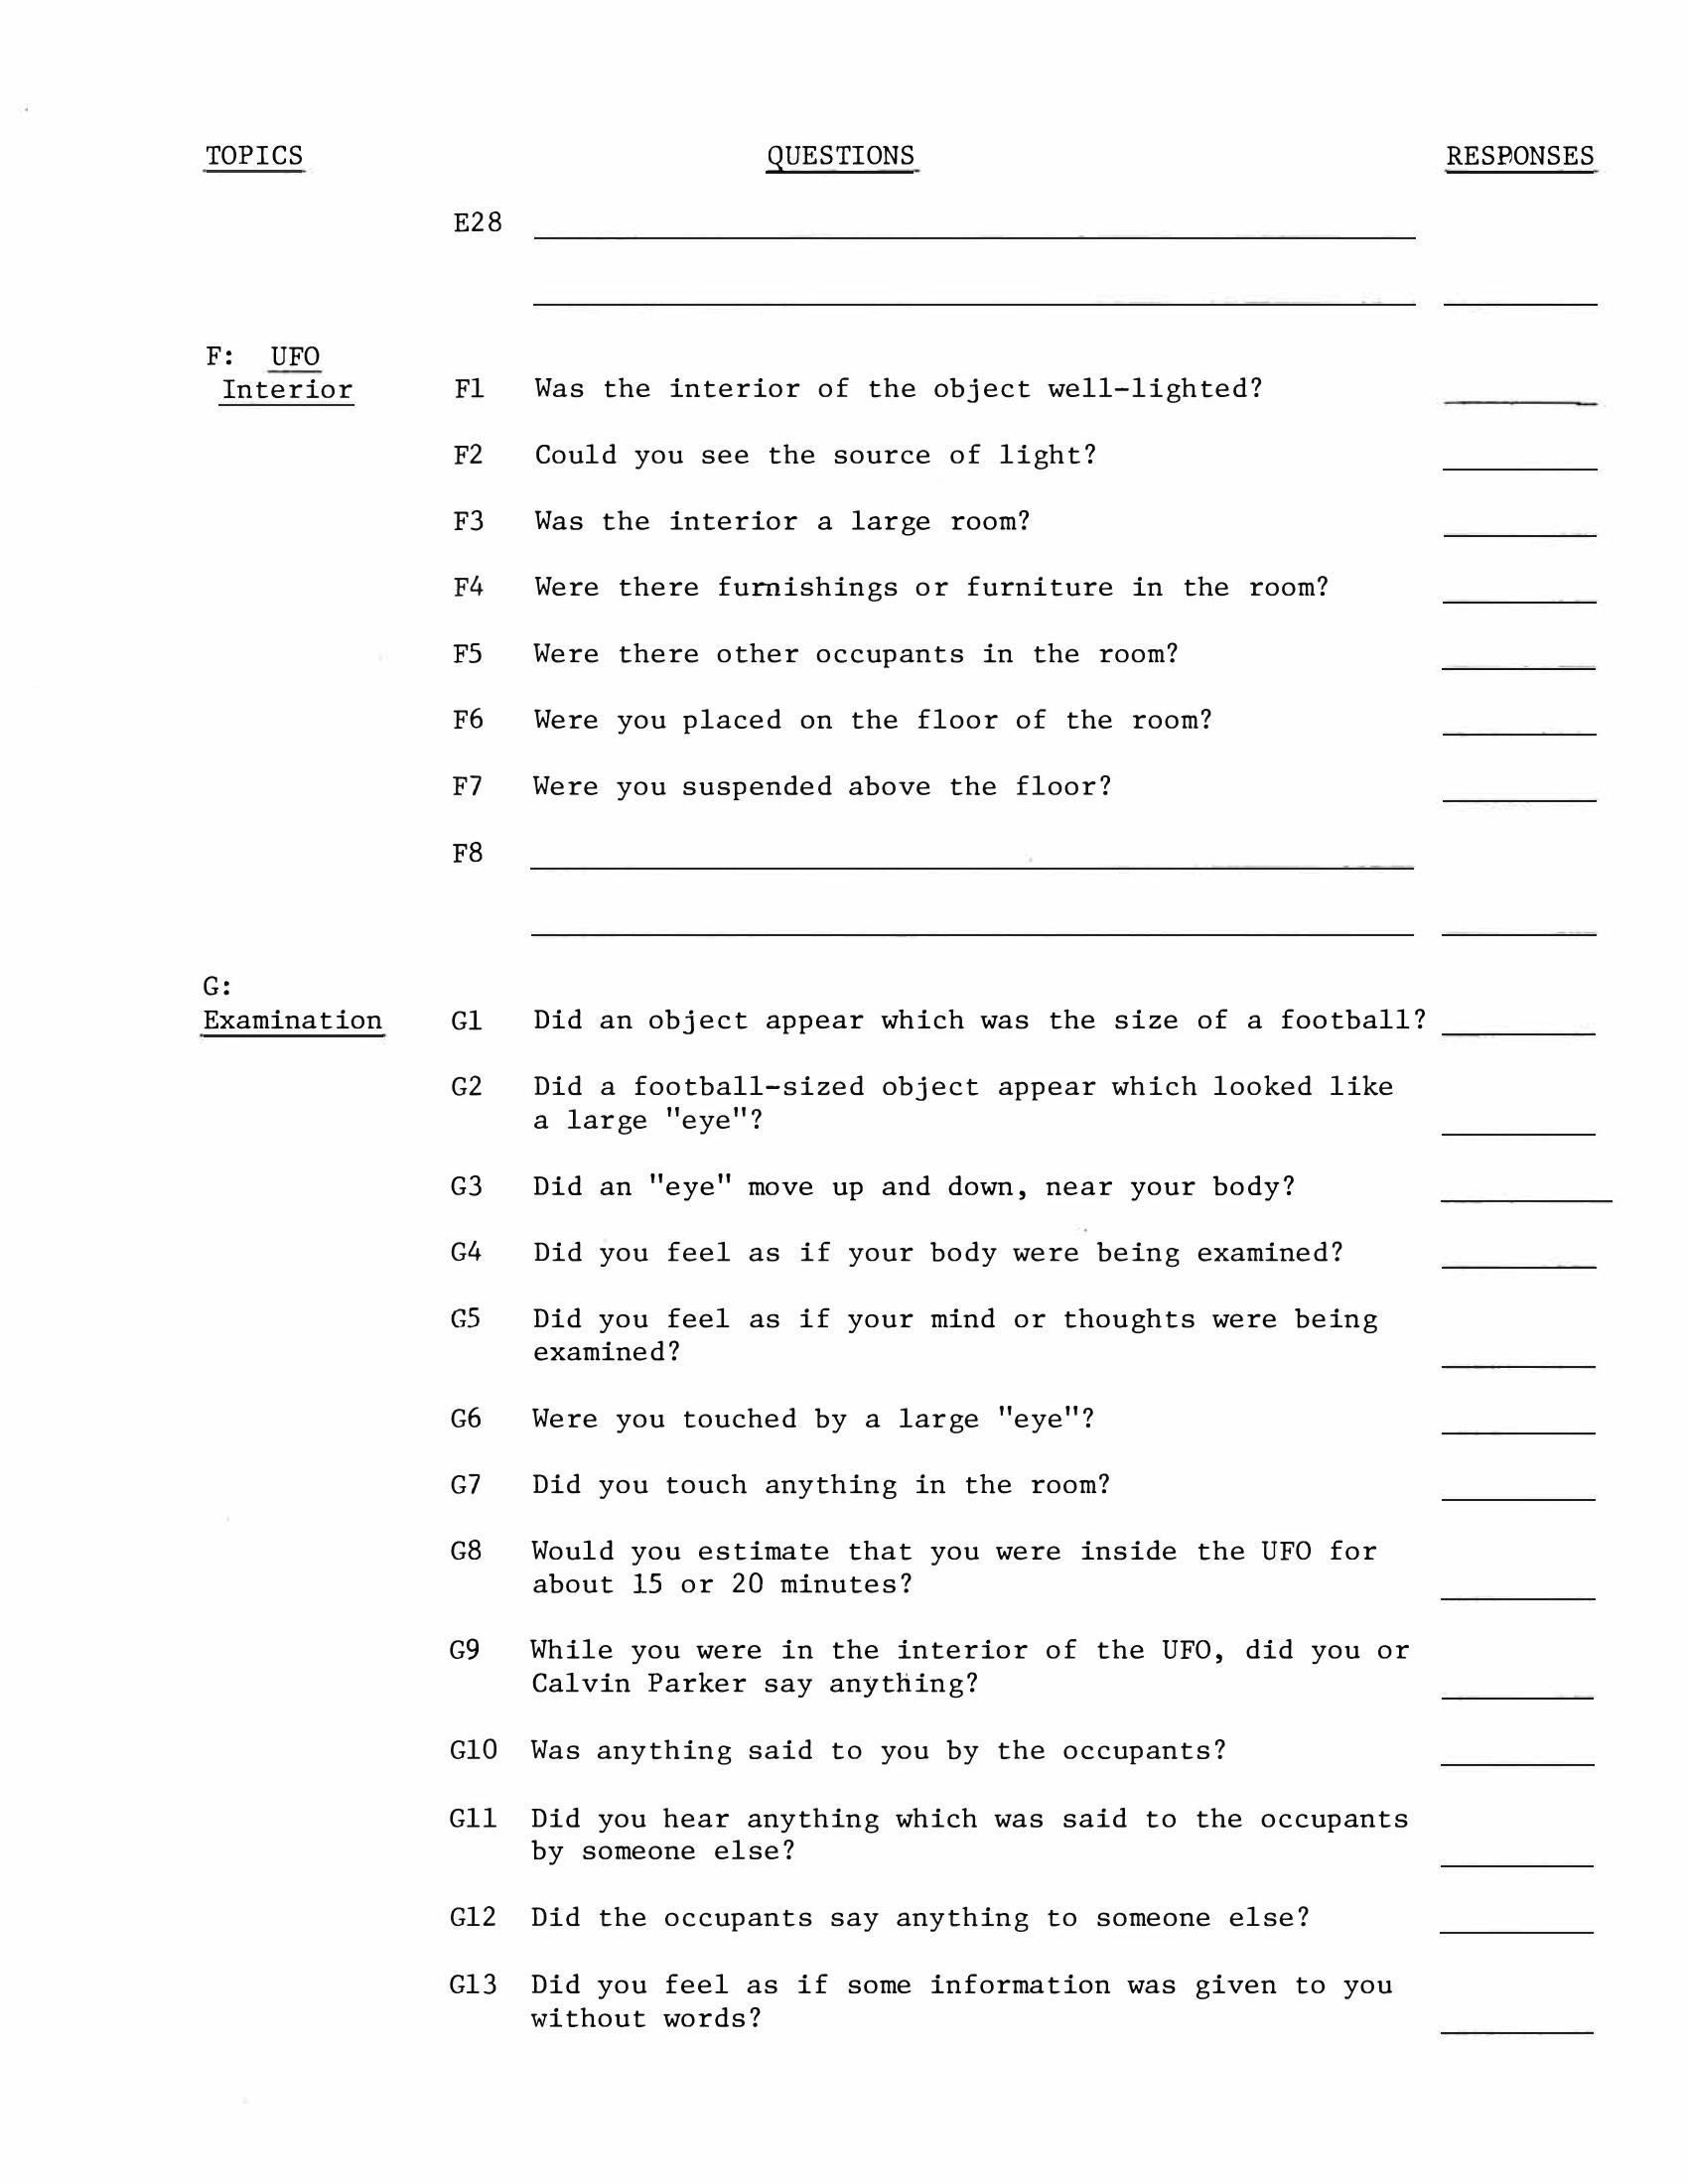 Dr. Sprinkle Questions Page-4